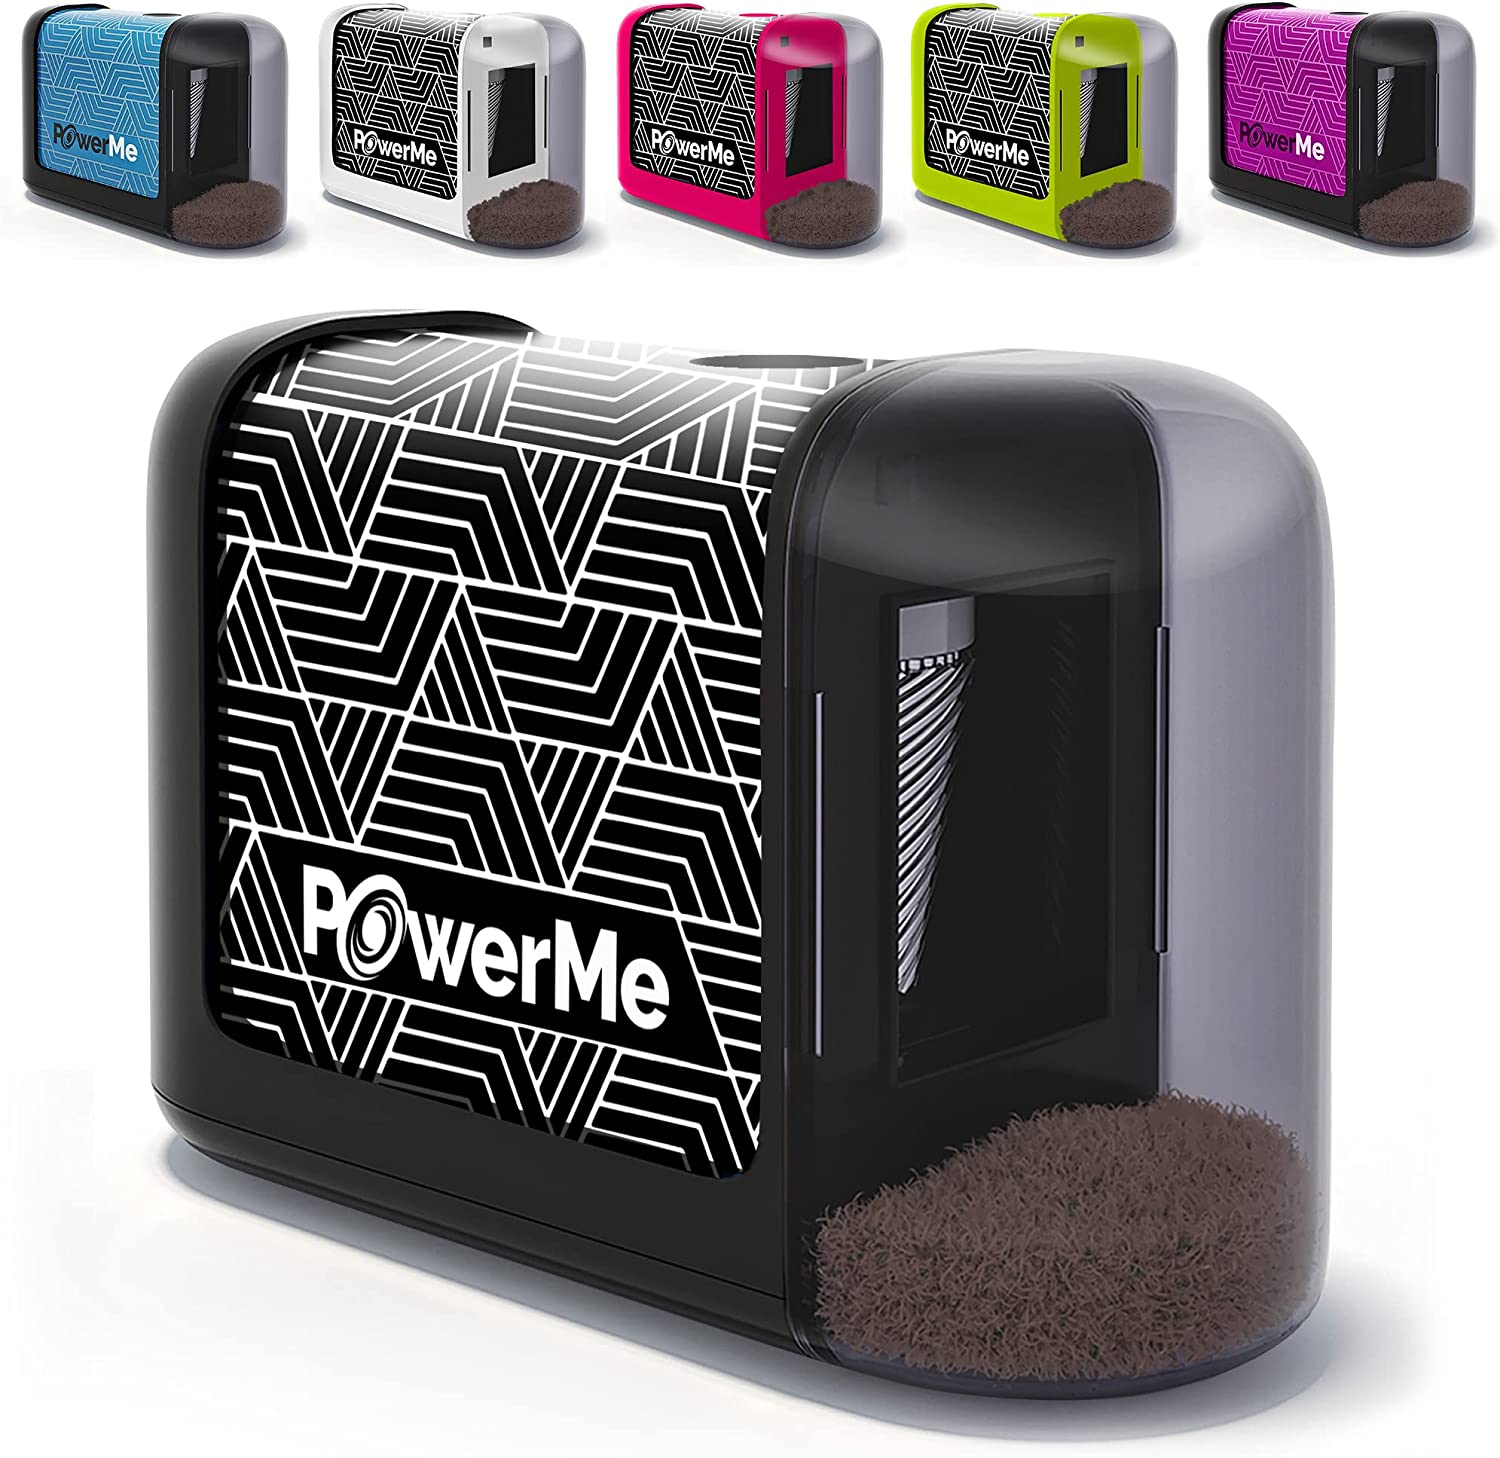 PowerMe Battery Operated Ultra Portable Automatic Electric Pencil Sharpener